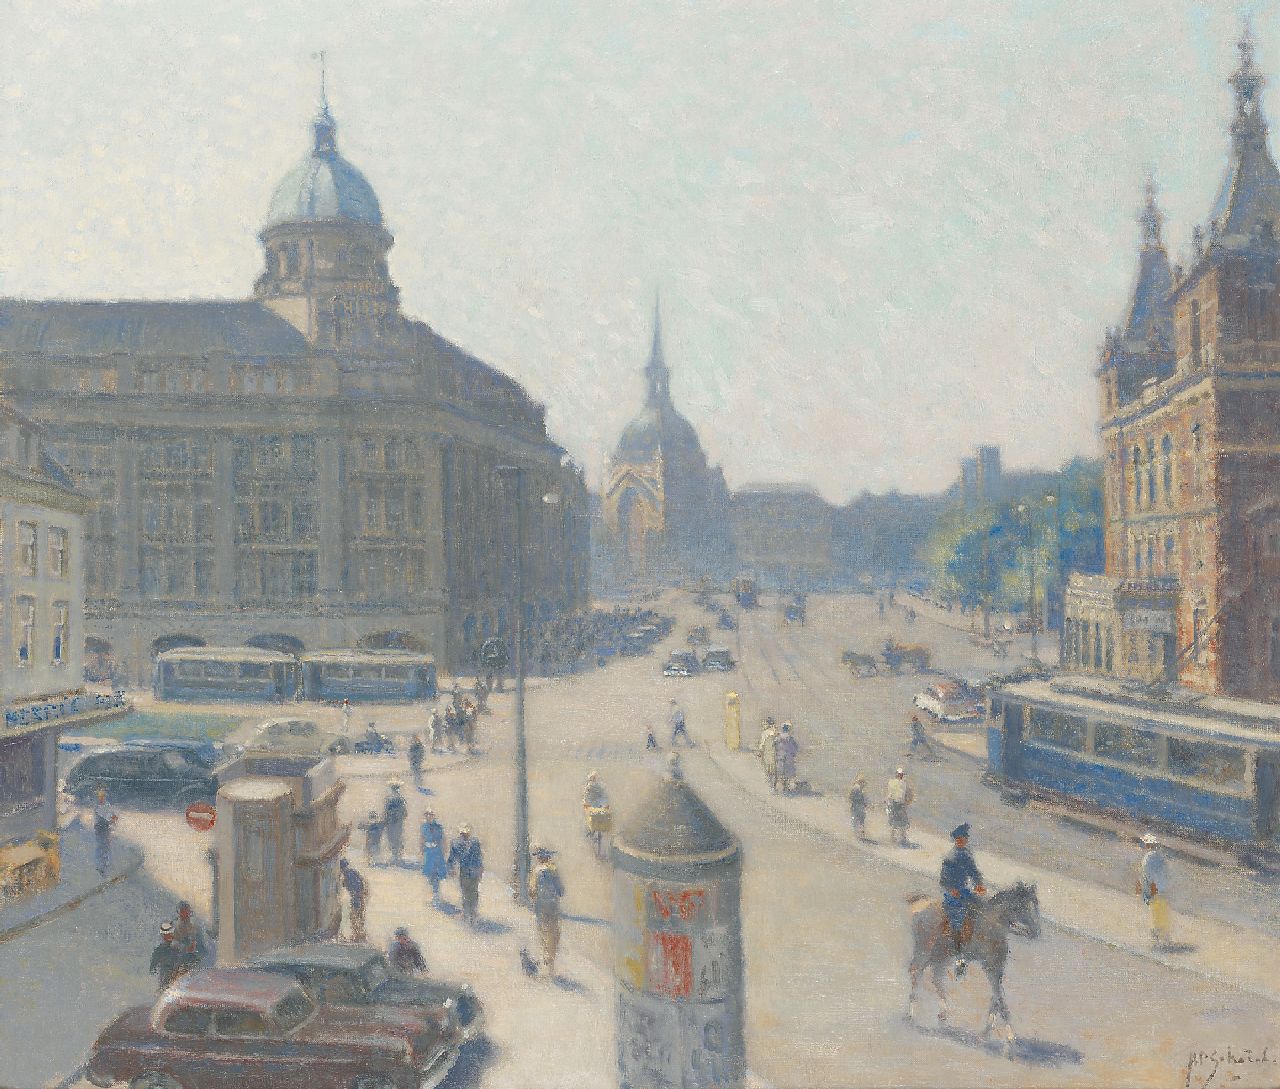 Schotel A.P.  | Anthonie Pieter Schotel | Paintings offered for sale | The Leidseplein, Amsterdam, seen from 'Extase', oil on canvas 60.2 x 70.5 cm, signed l.r.